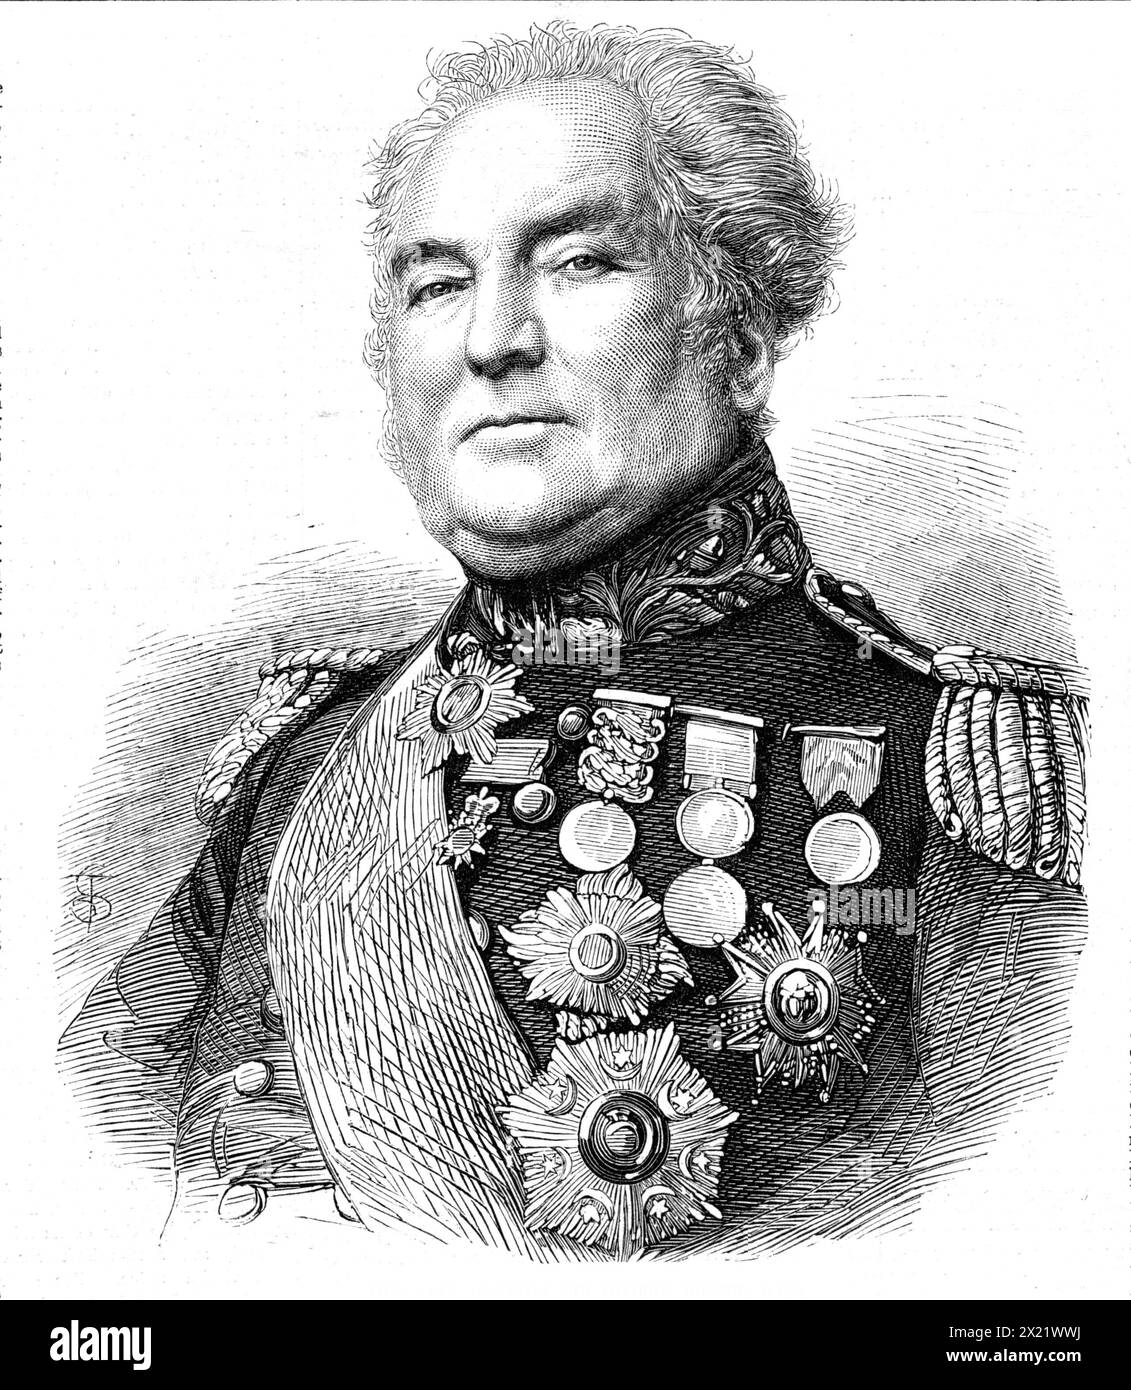 The late General Sir George Brown, G.C.B., 1865. Engraving from a photograph by Mr. L. Werner. 'During nearly the last sixty years, almost to the time of his death, the late General served in the Army, seeing much active service and holding many important commands, the last being that of the forces in Ireland, to which he was appointed five years ago. The present generation will best remember Sir George Brown as the commander of the Light Division during the Crimean War, and the brilliant perseverance with which he swept over the obstacles prepared by the Russians on the slopes beyond the Alma Stock Photo